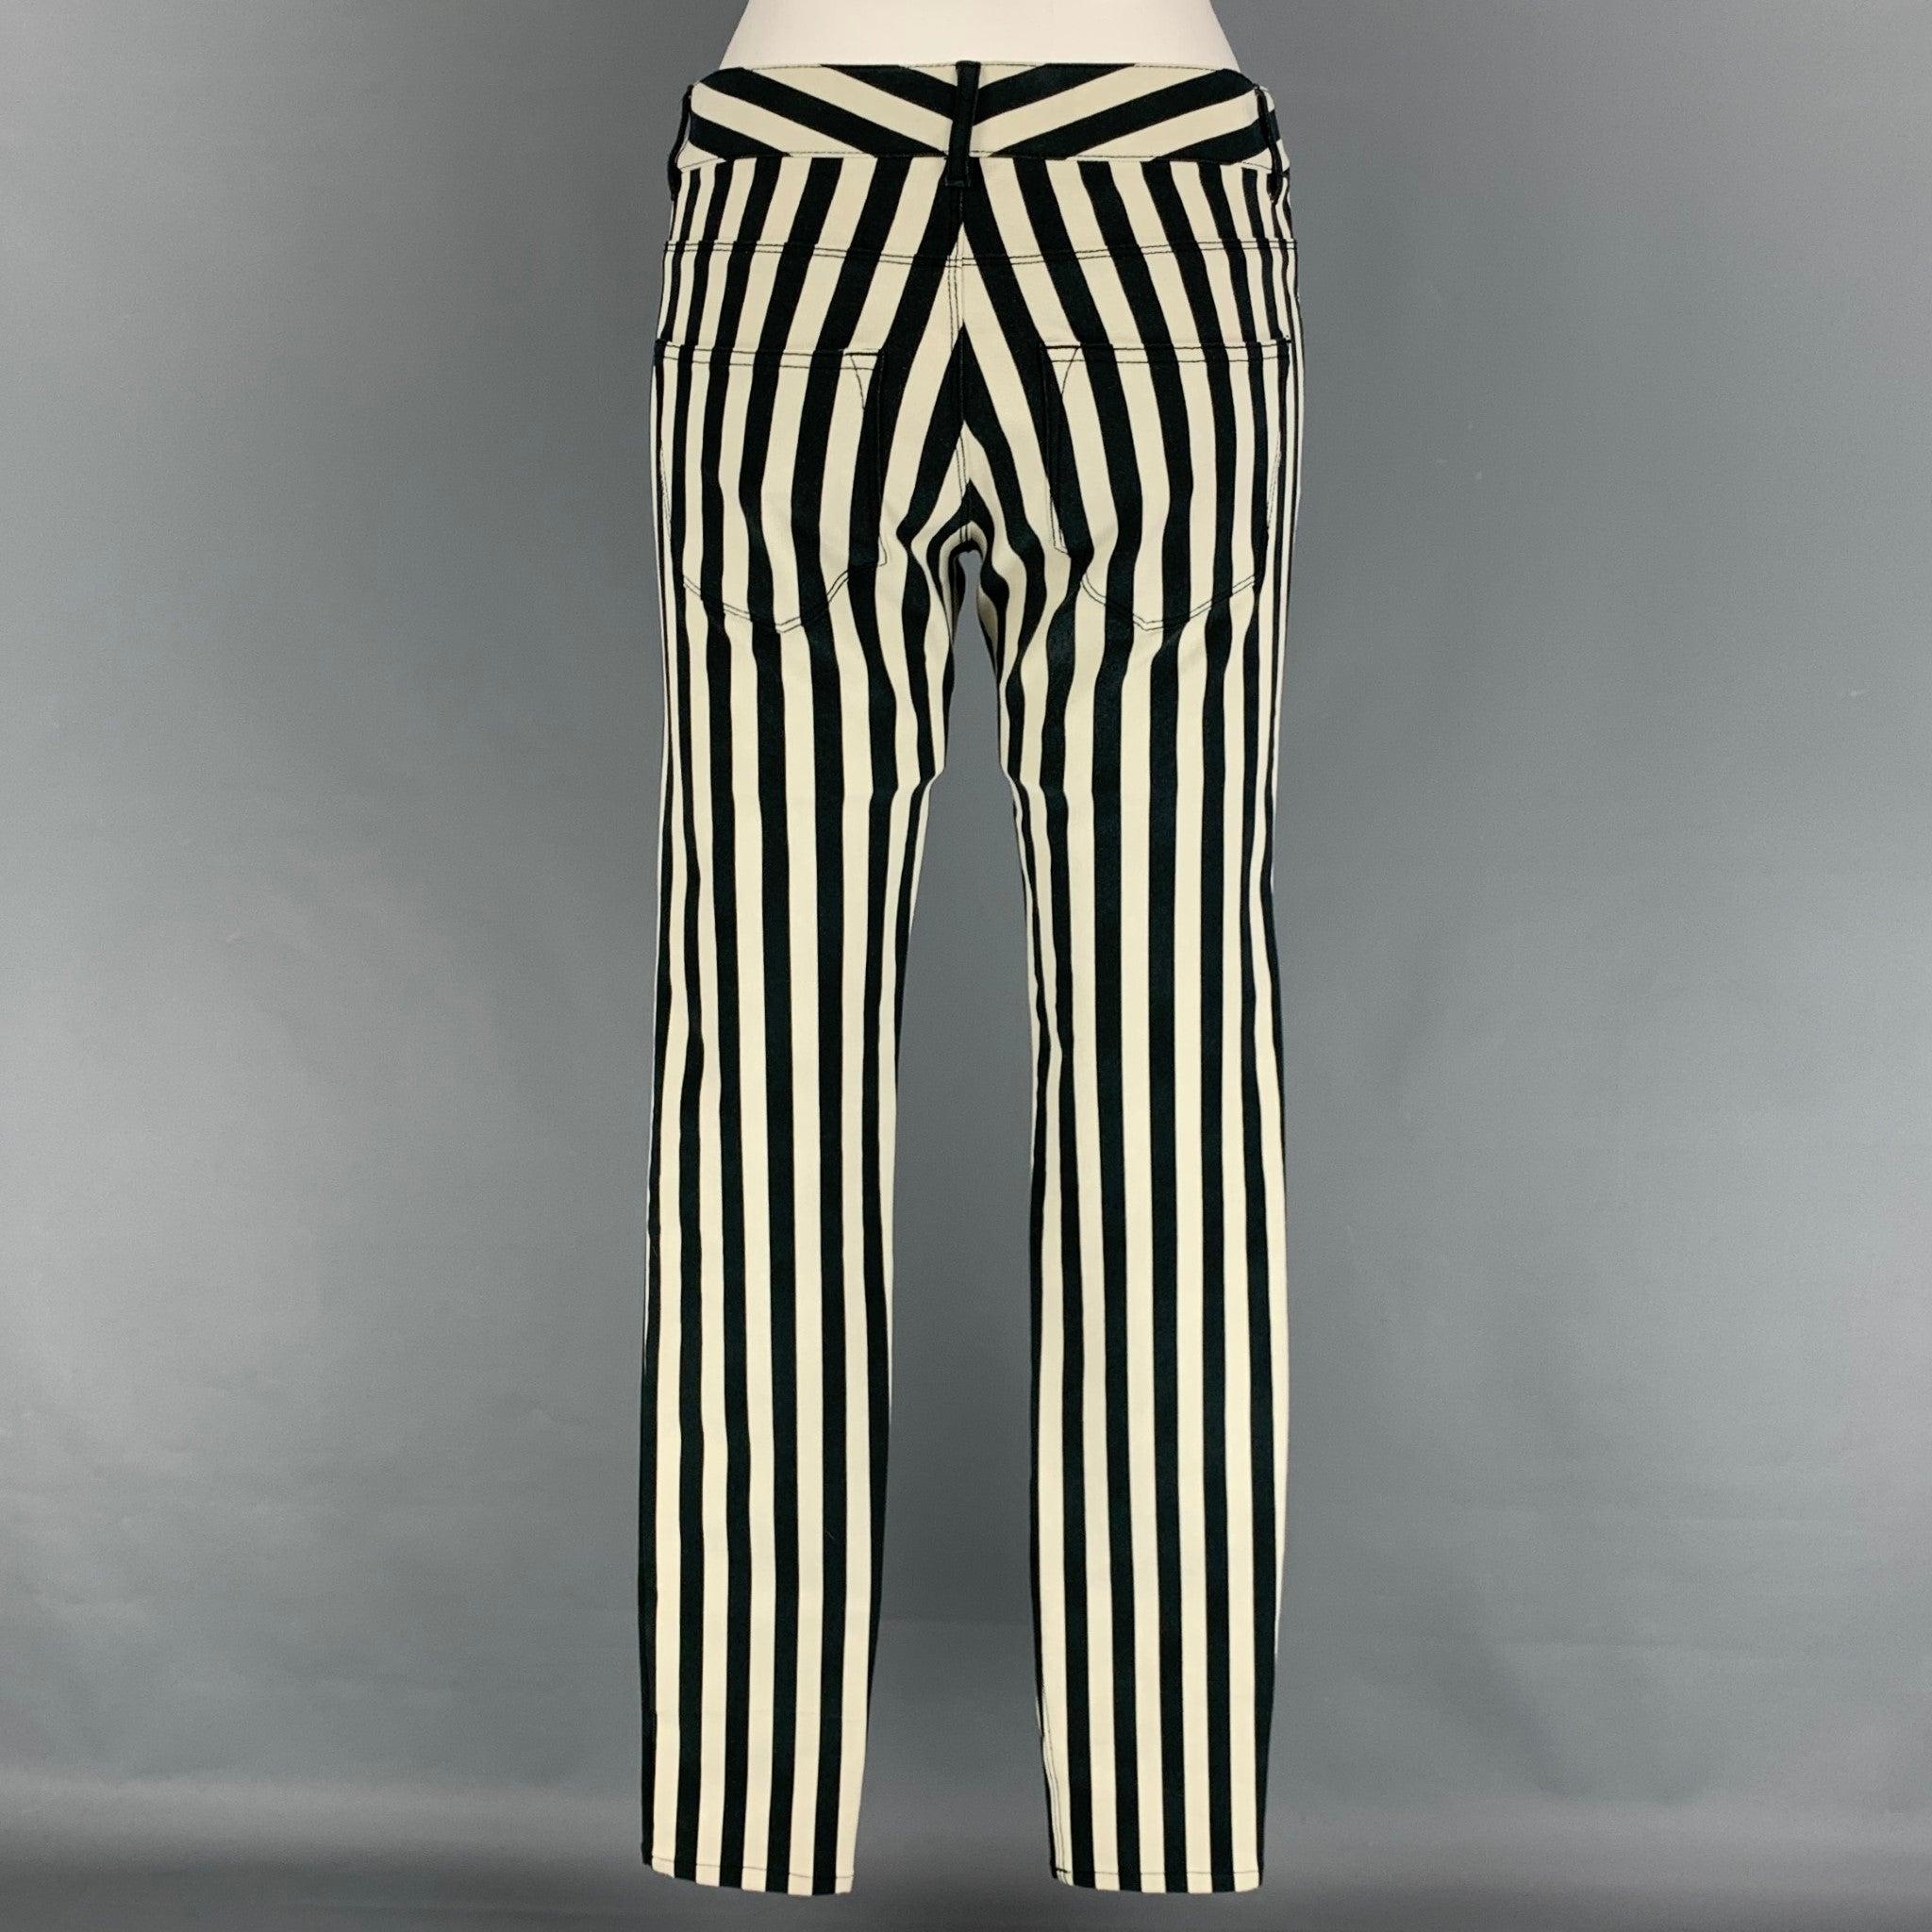 JOSEPH jeans comes in a black & white stripe cotton featuring a skinny fit and a zip fly closure.
Very Good
Pre-Owned Condition. 

Marked:   38 

Measurements: 
  Waist: 30 inches  Rise: 9 inches  Inseam: 35 inches 
  
  
 
Reference: